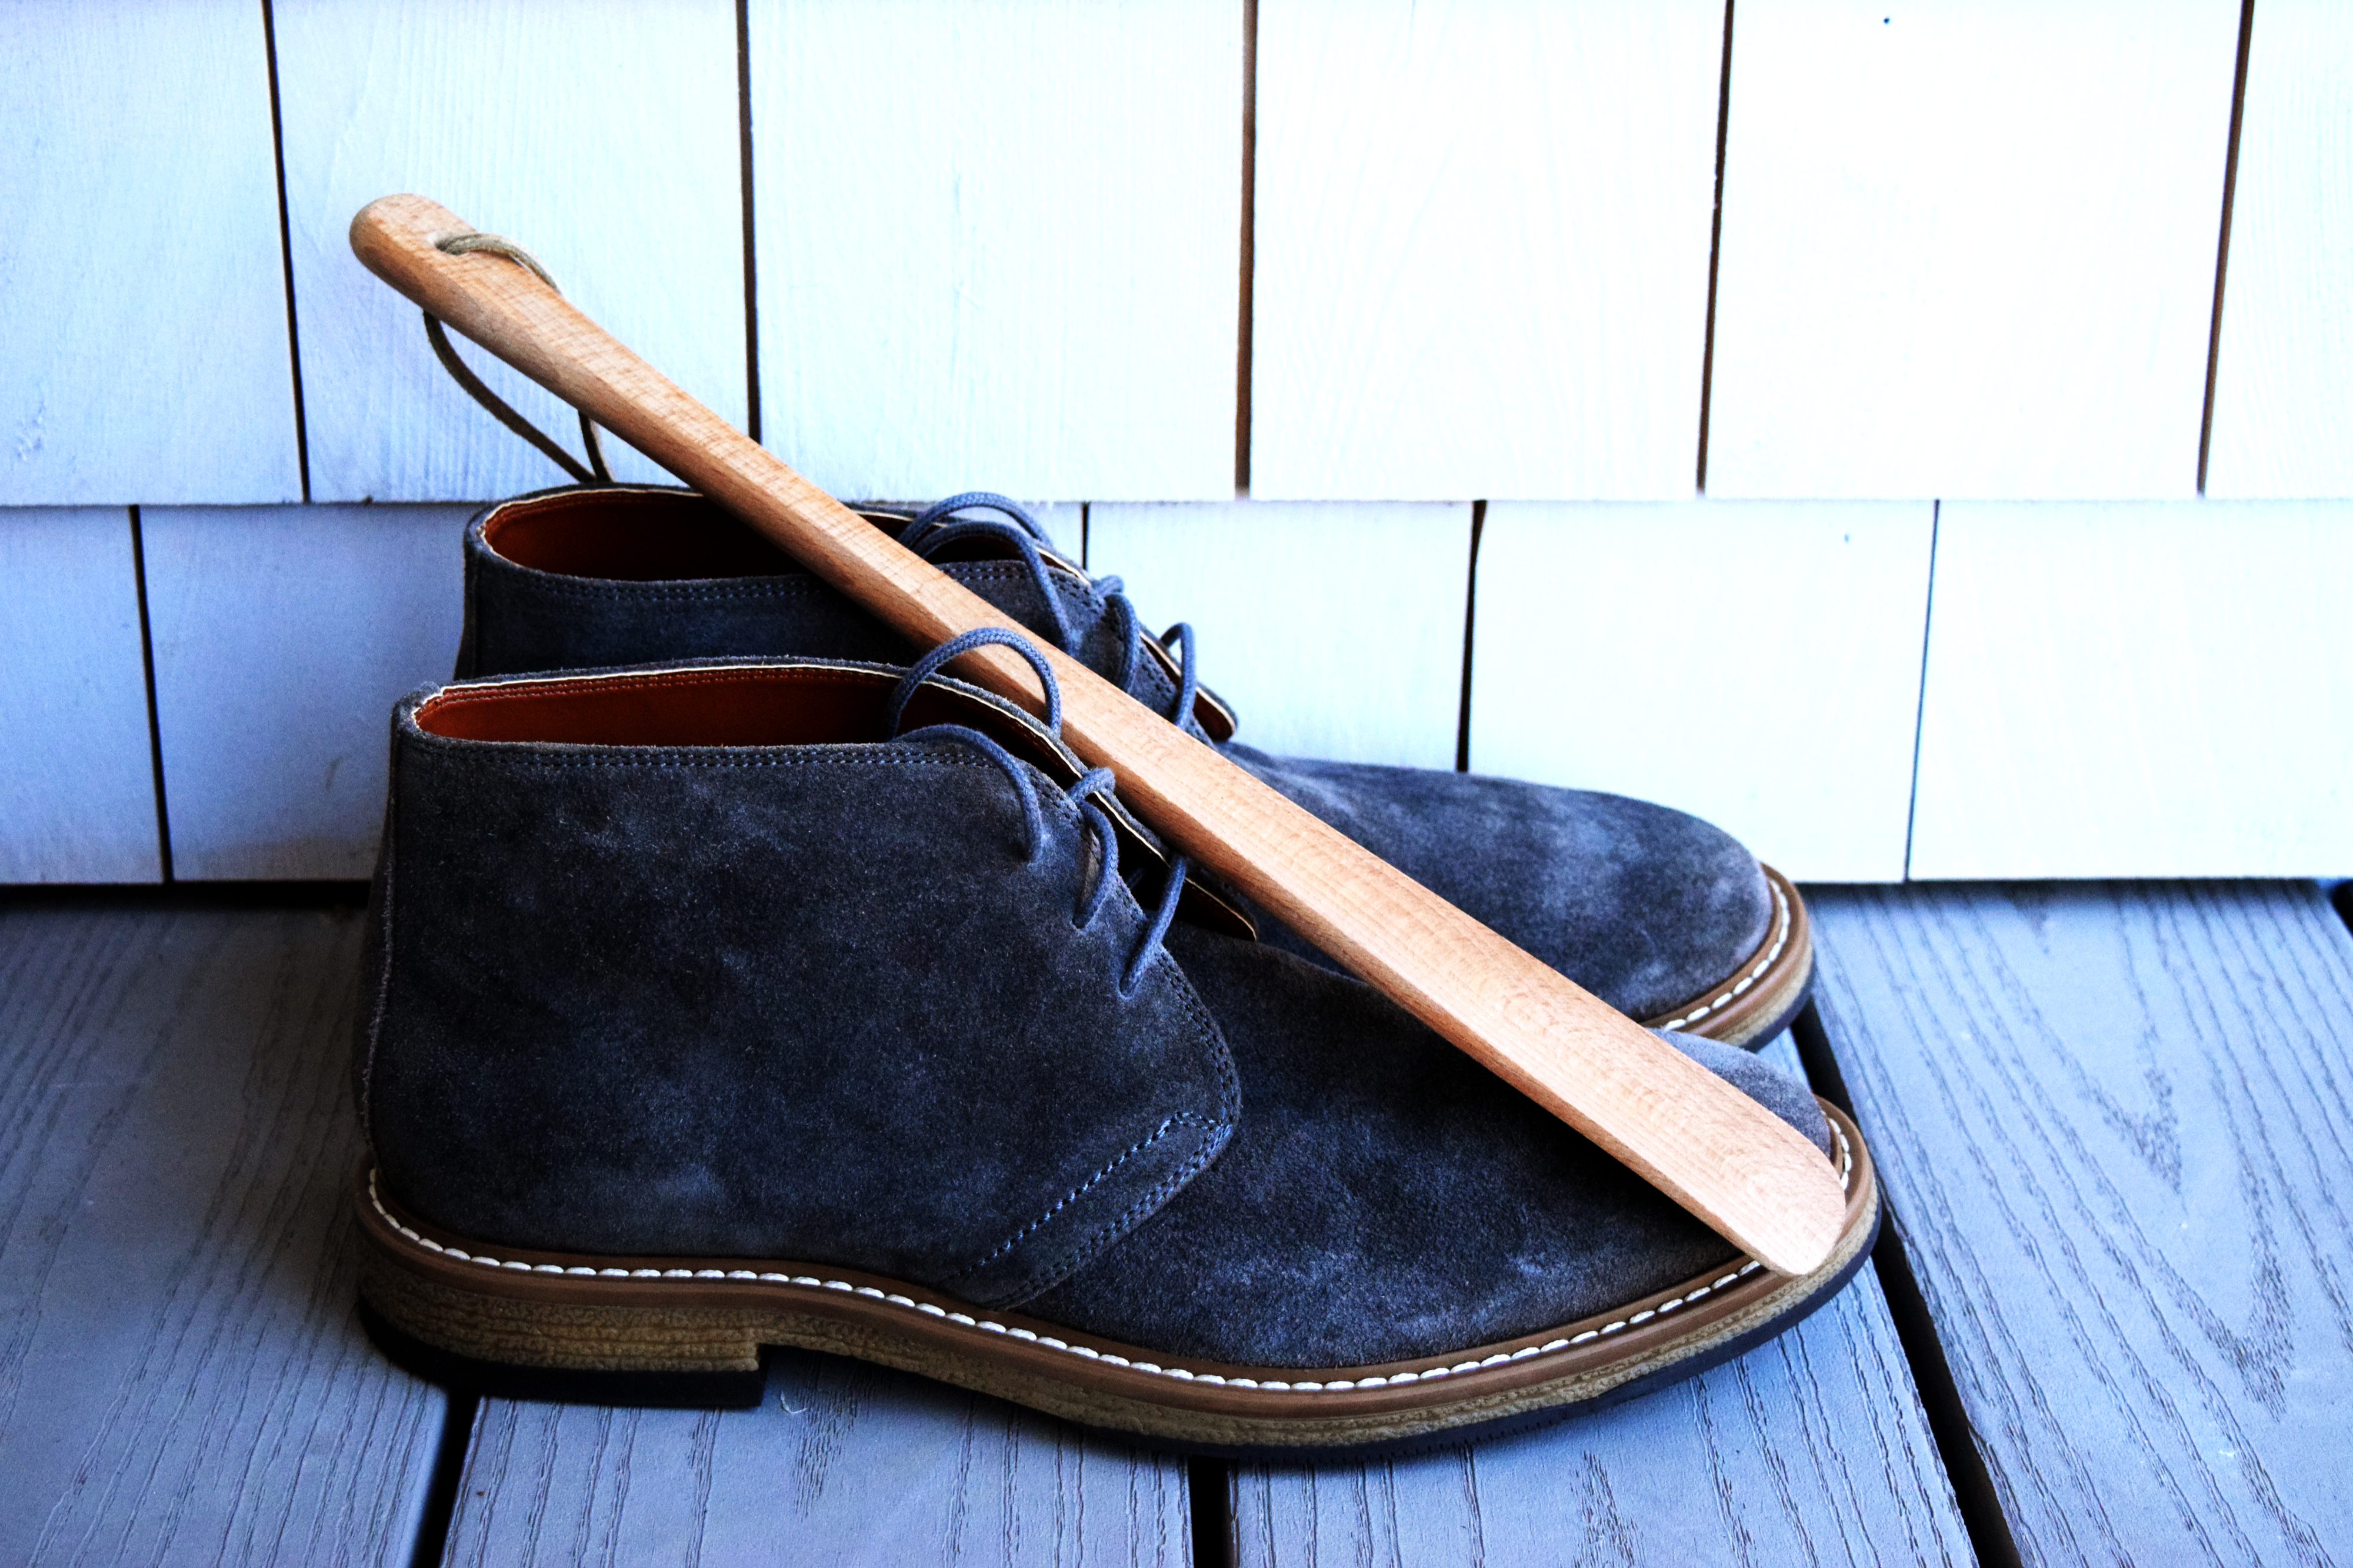 Shoehorn leather strap